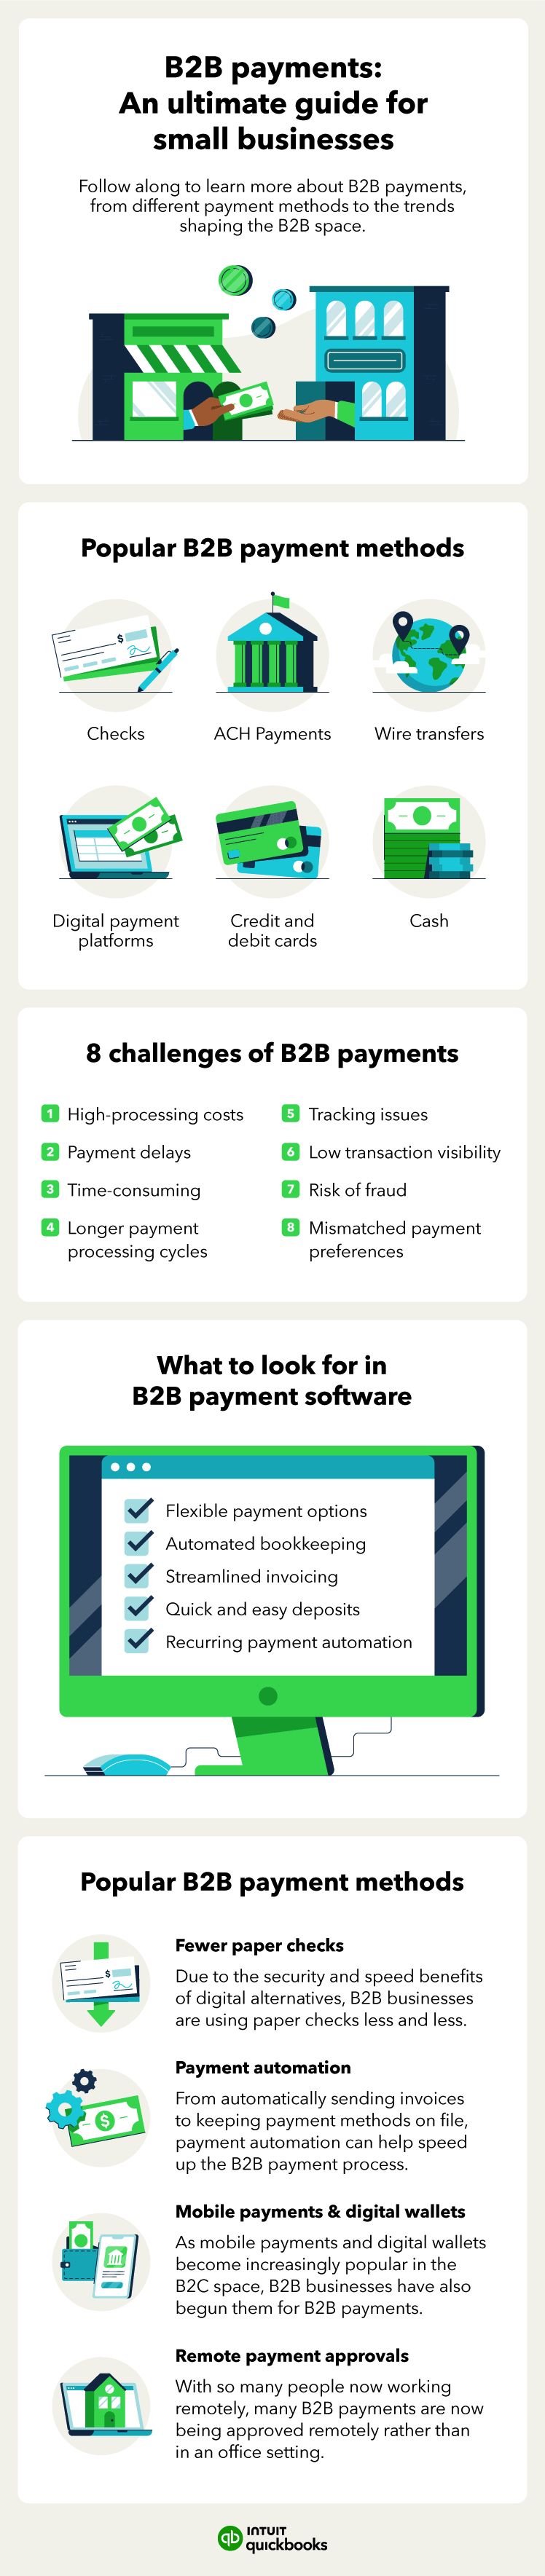 An infographic covers everything from B2B payment methods to trends shaping the future of B2B payments.